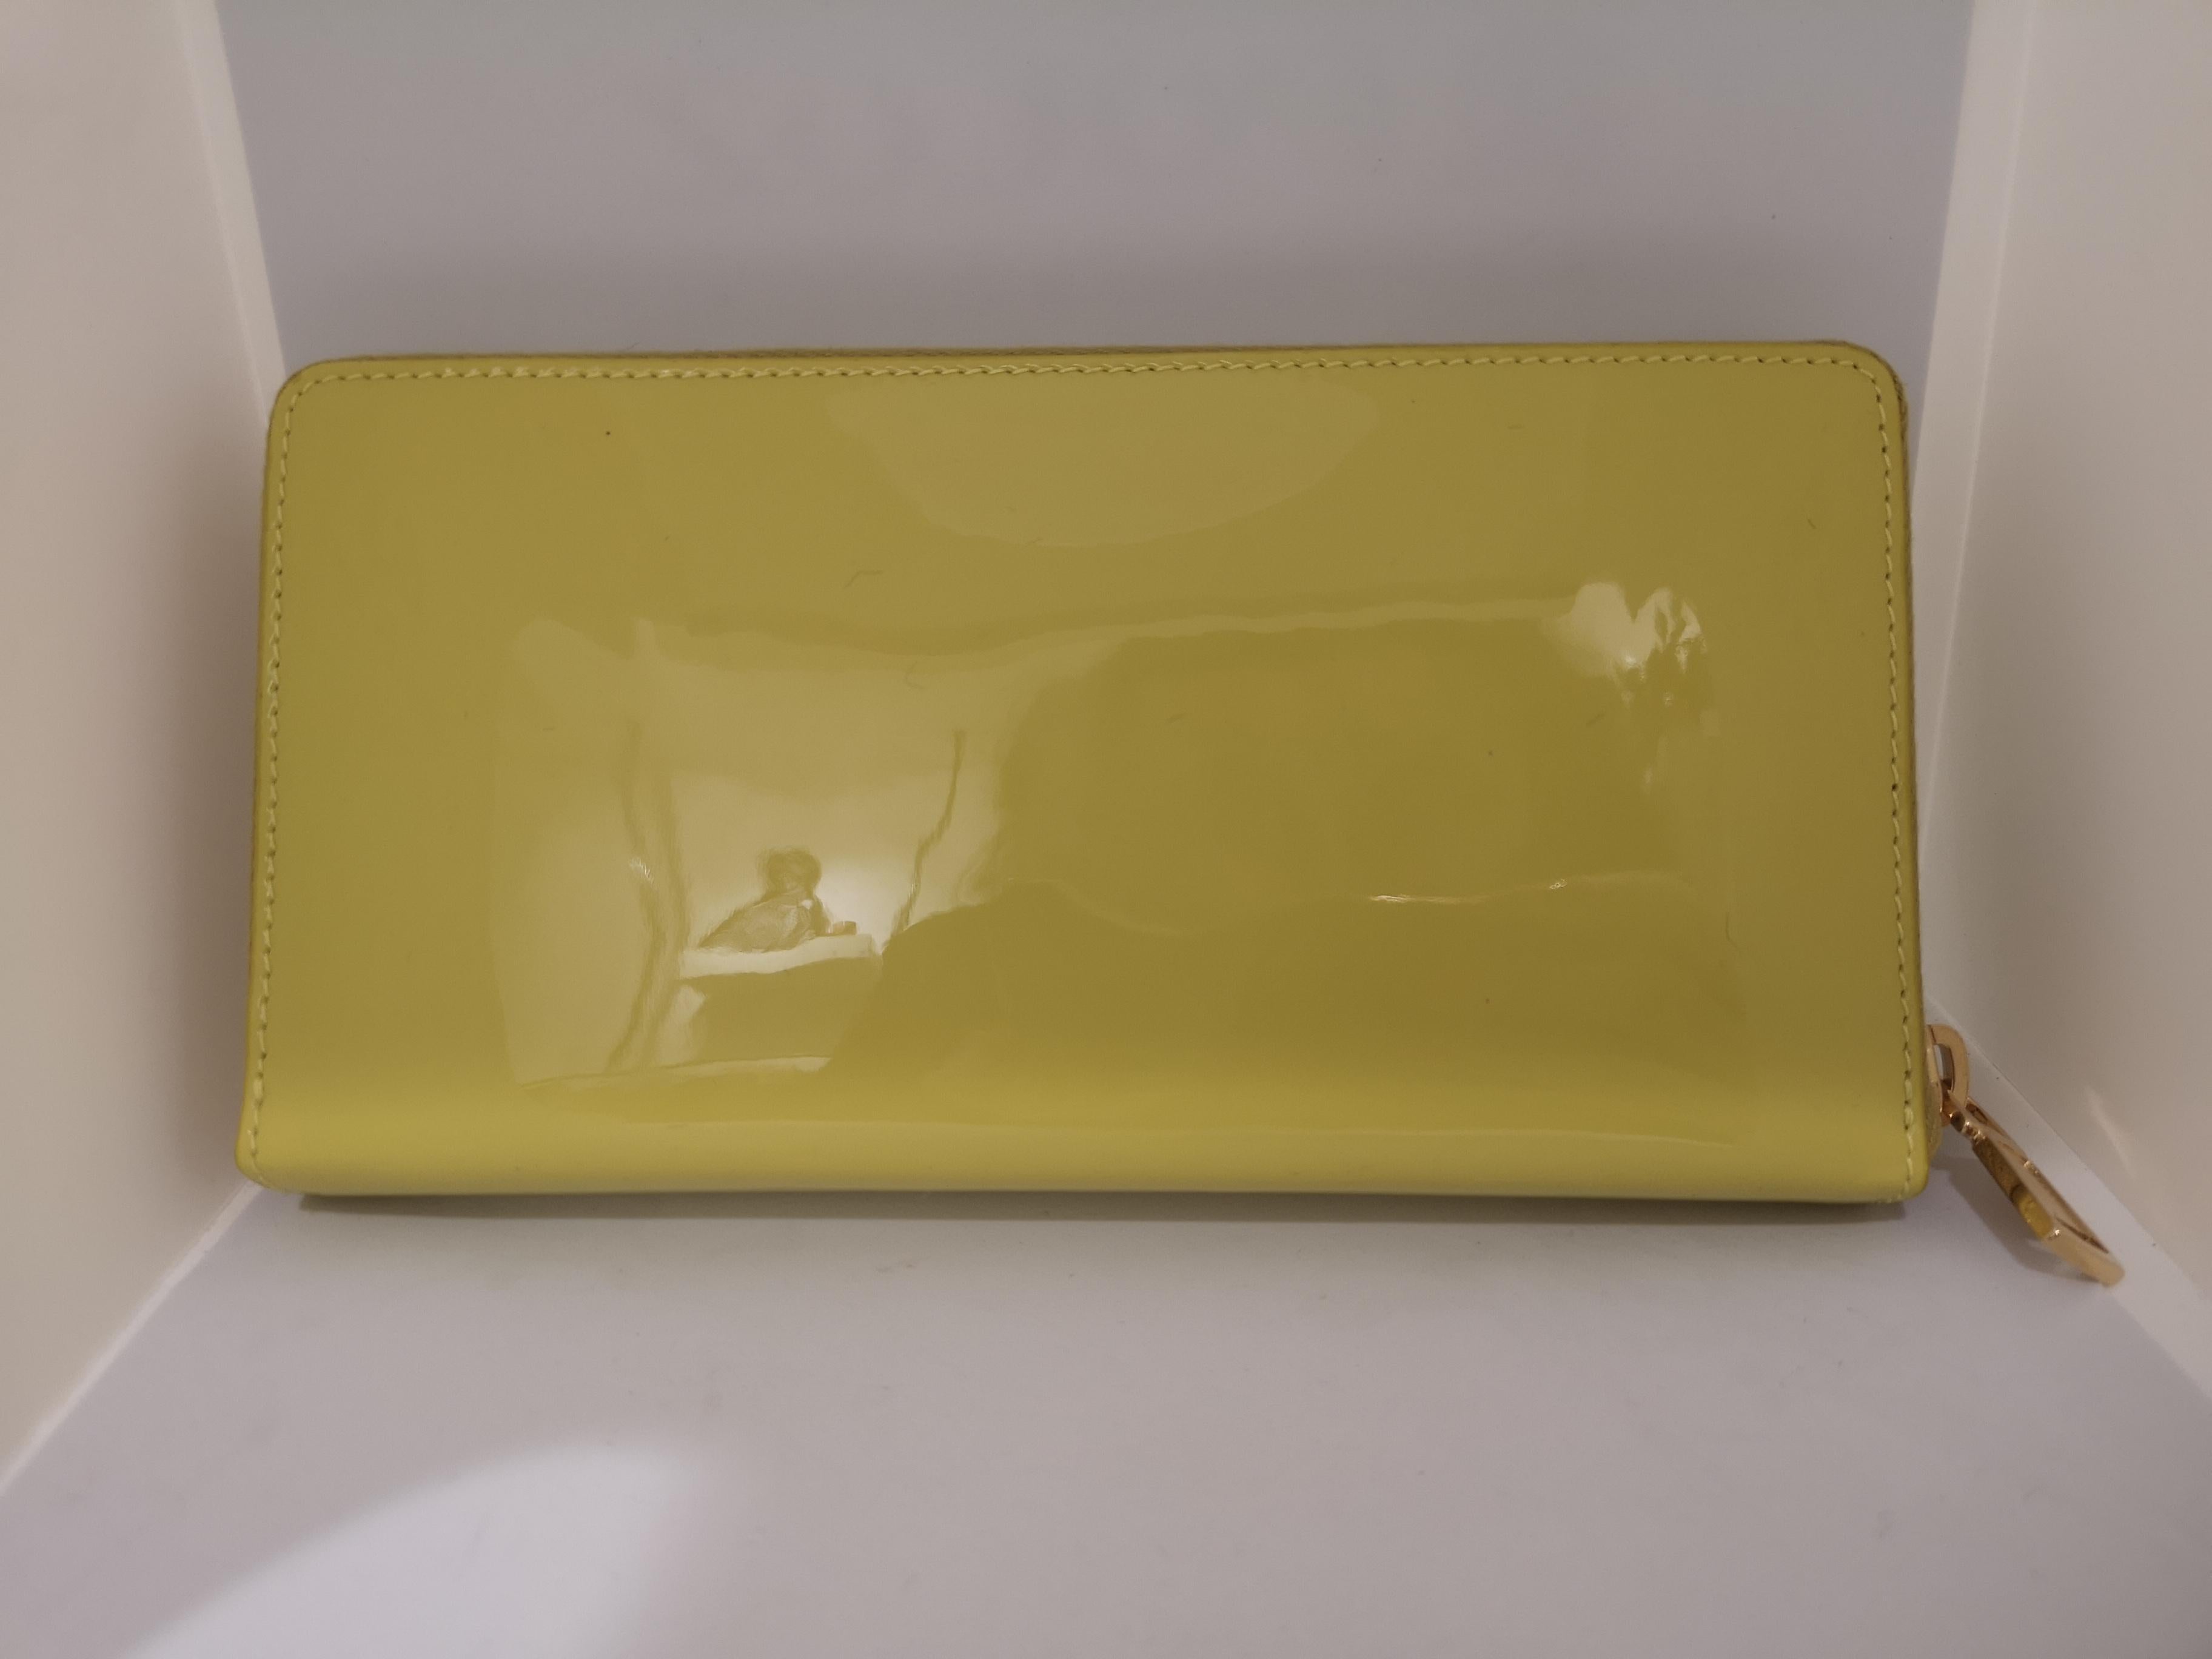 Yves Saint Laurent Belle De Jour Patent Leather Zip Around Wallet NWOT 
Never used, still with tags and box